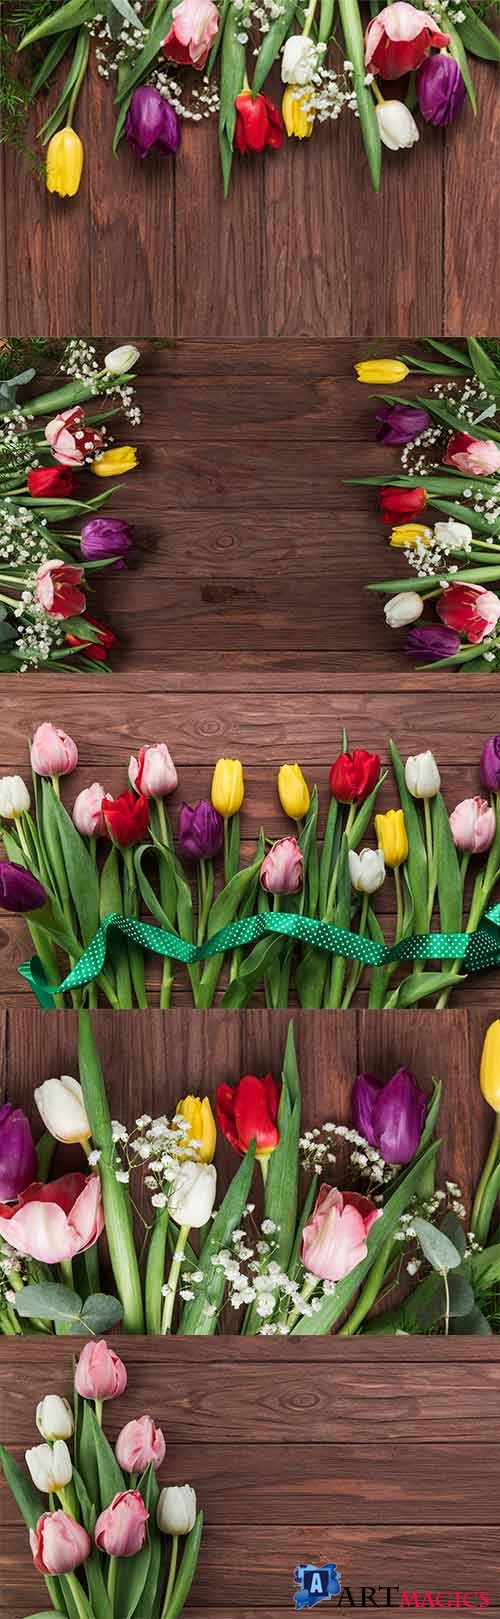     -   / Backgrounds with beautiful tulips - Raster clipart